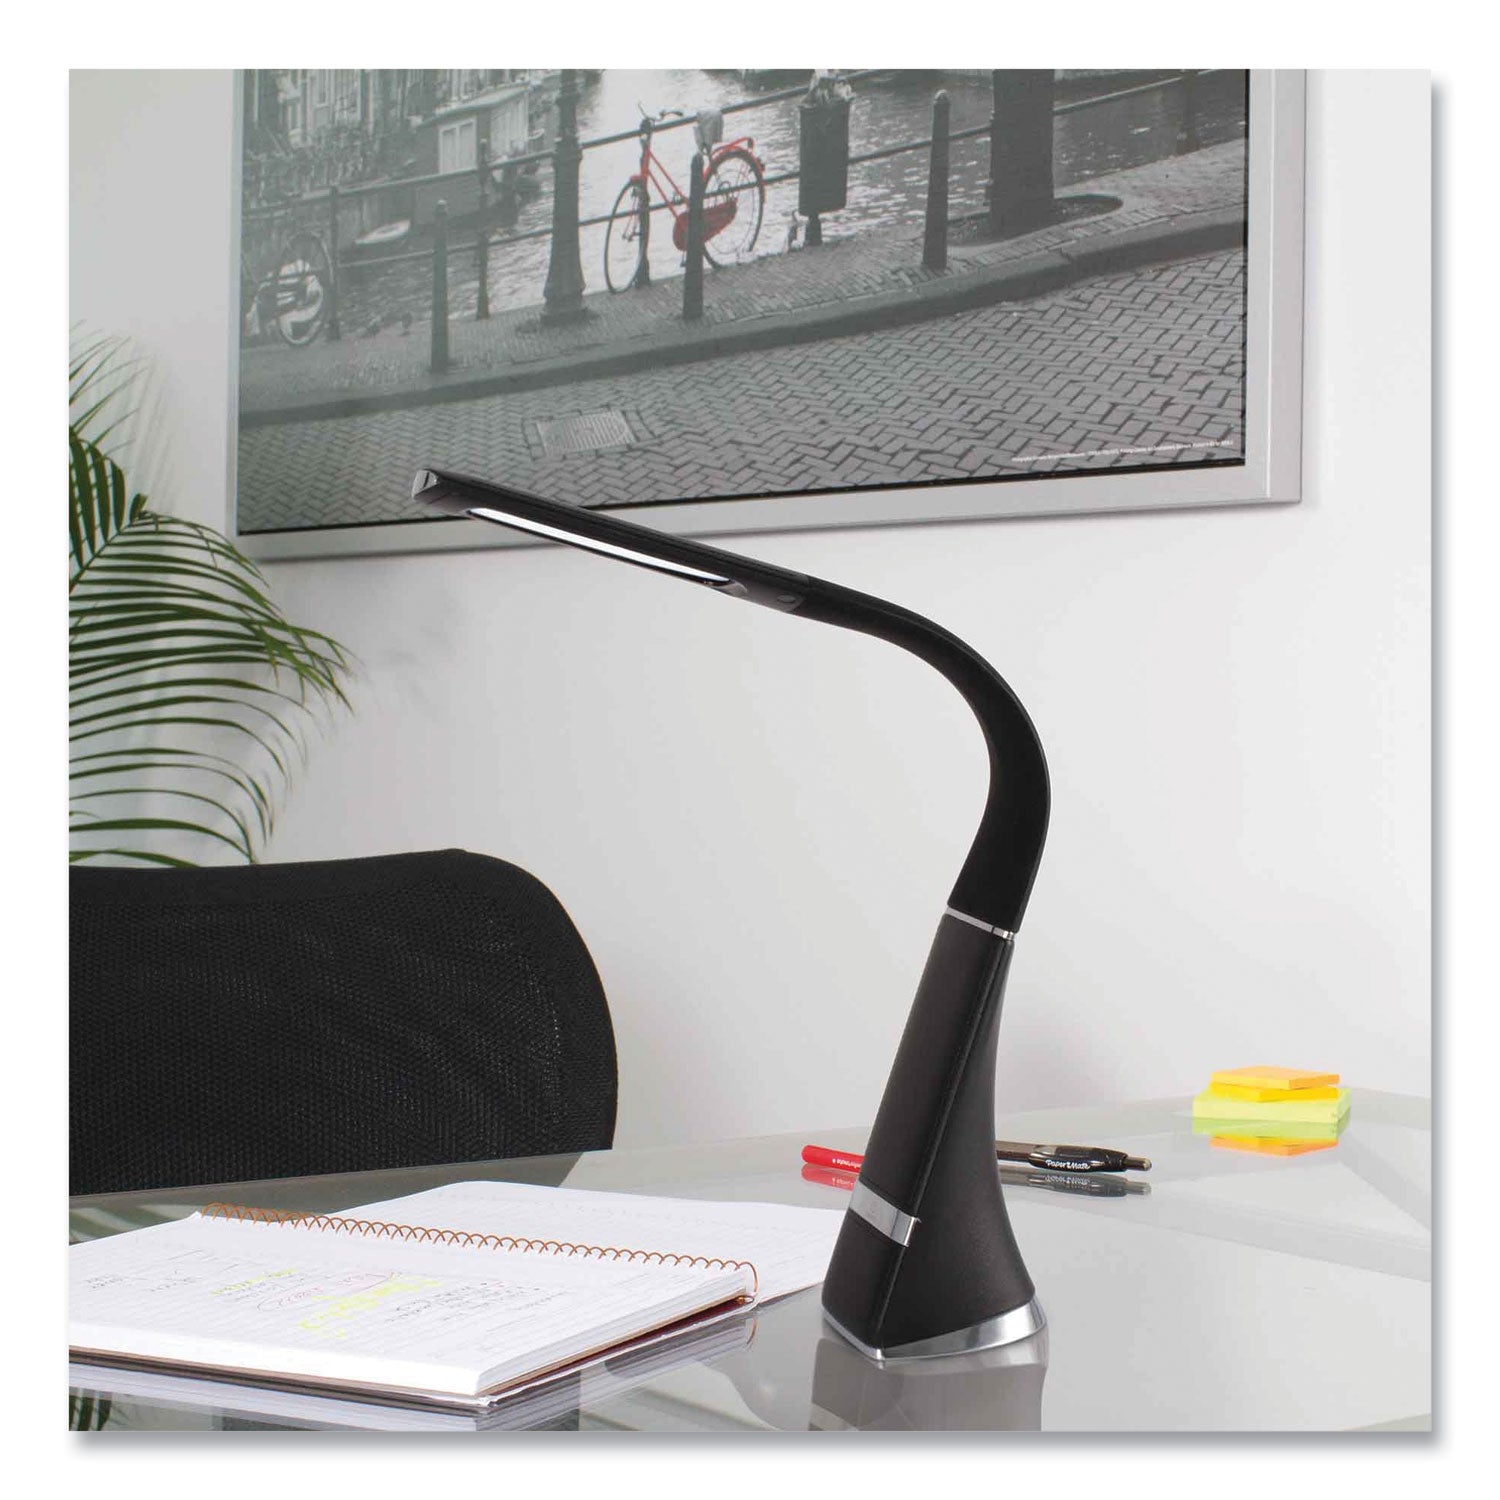 wellness-series-recharge-led-desk-lamp-1075-to-1875-high-black-ships-in-4-6-business-days_ottcs59g59shpr - 1